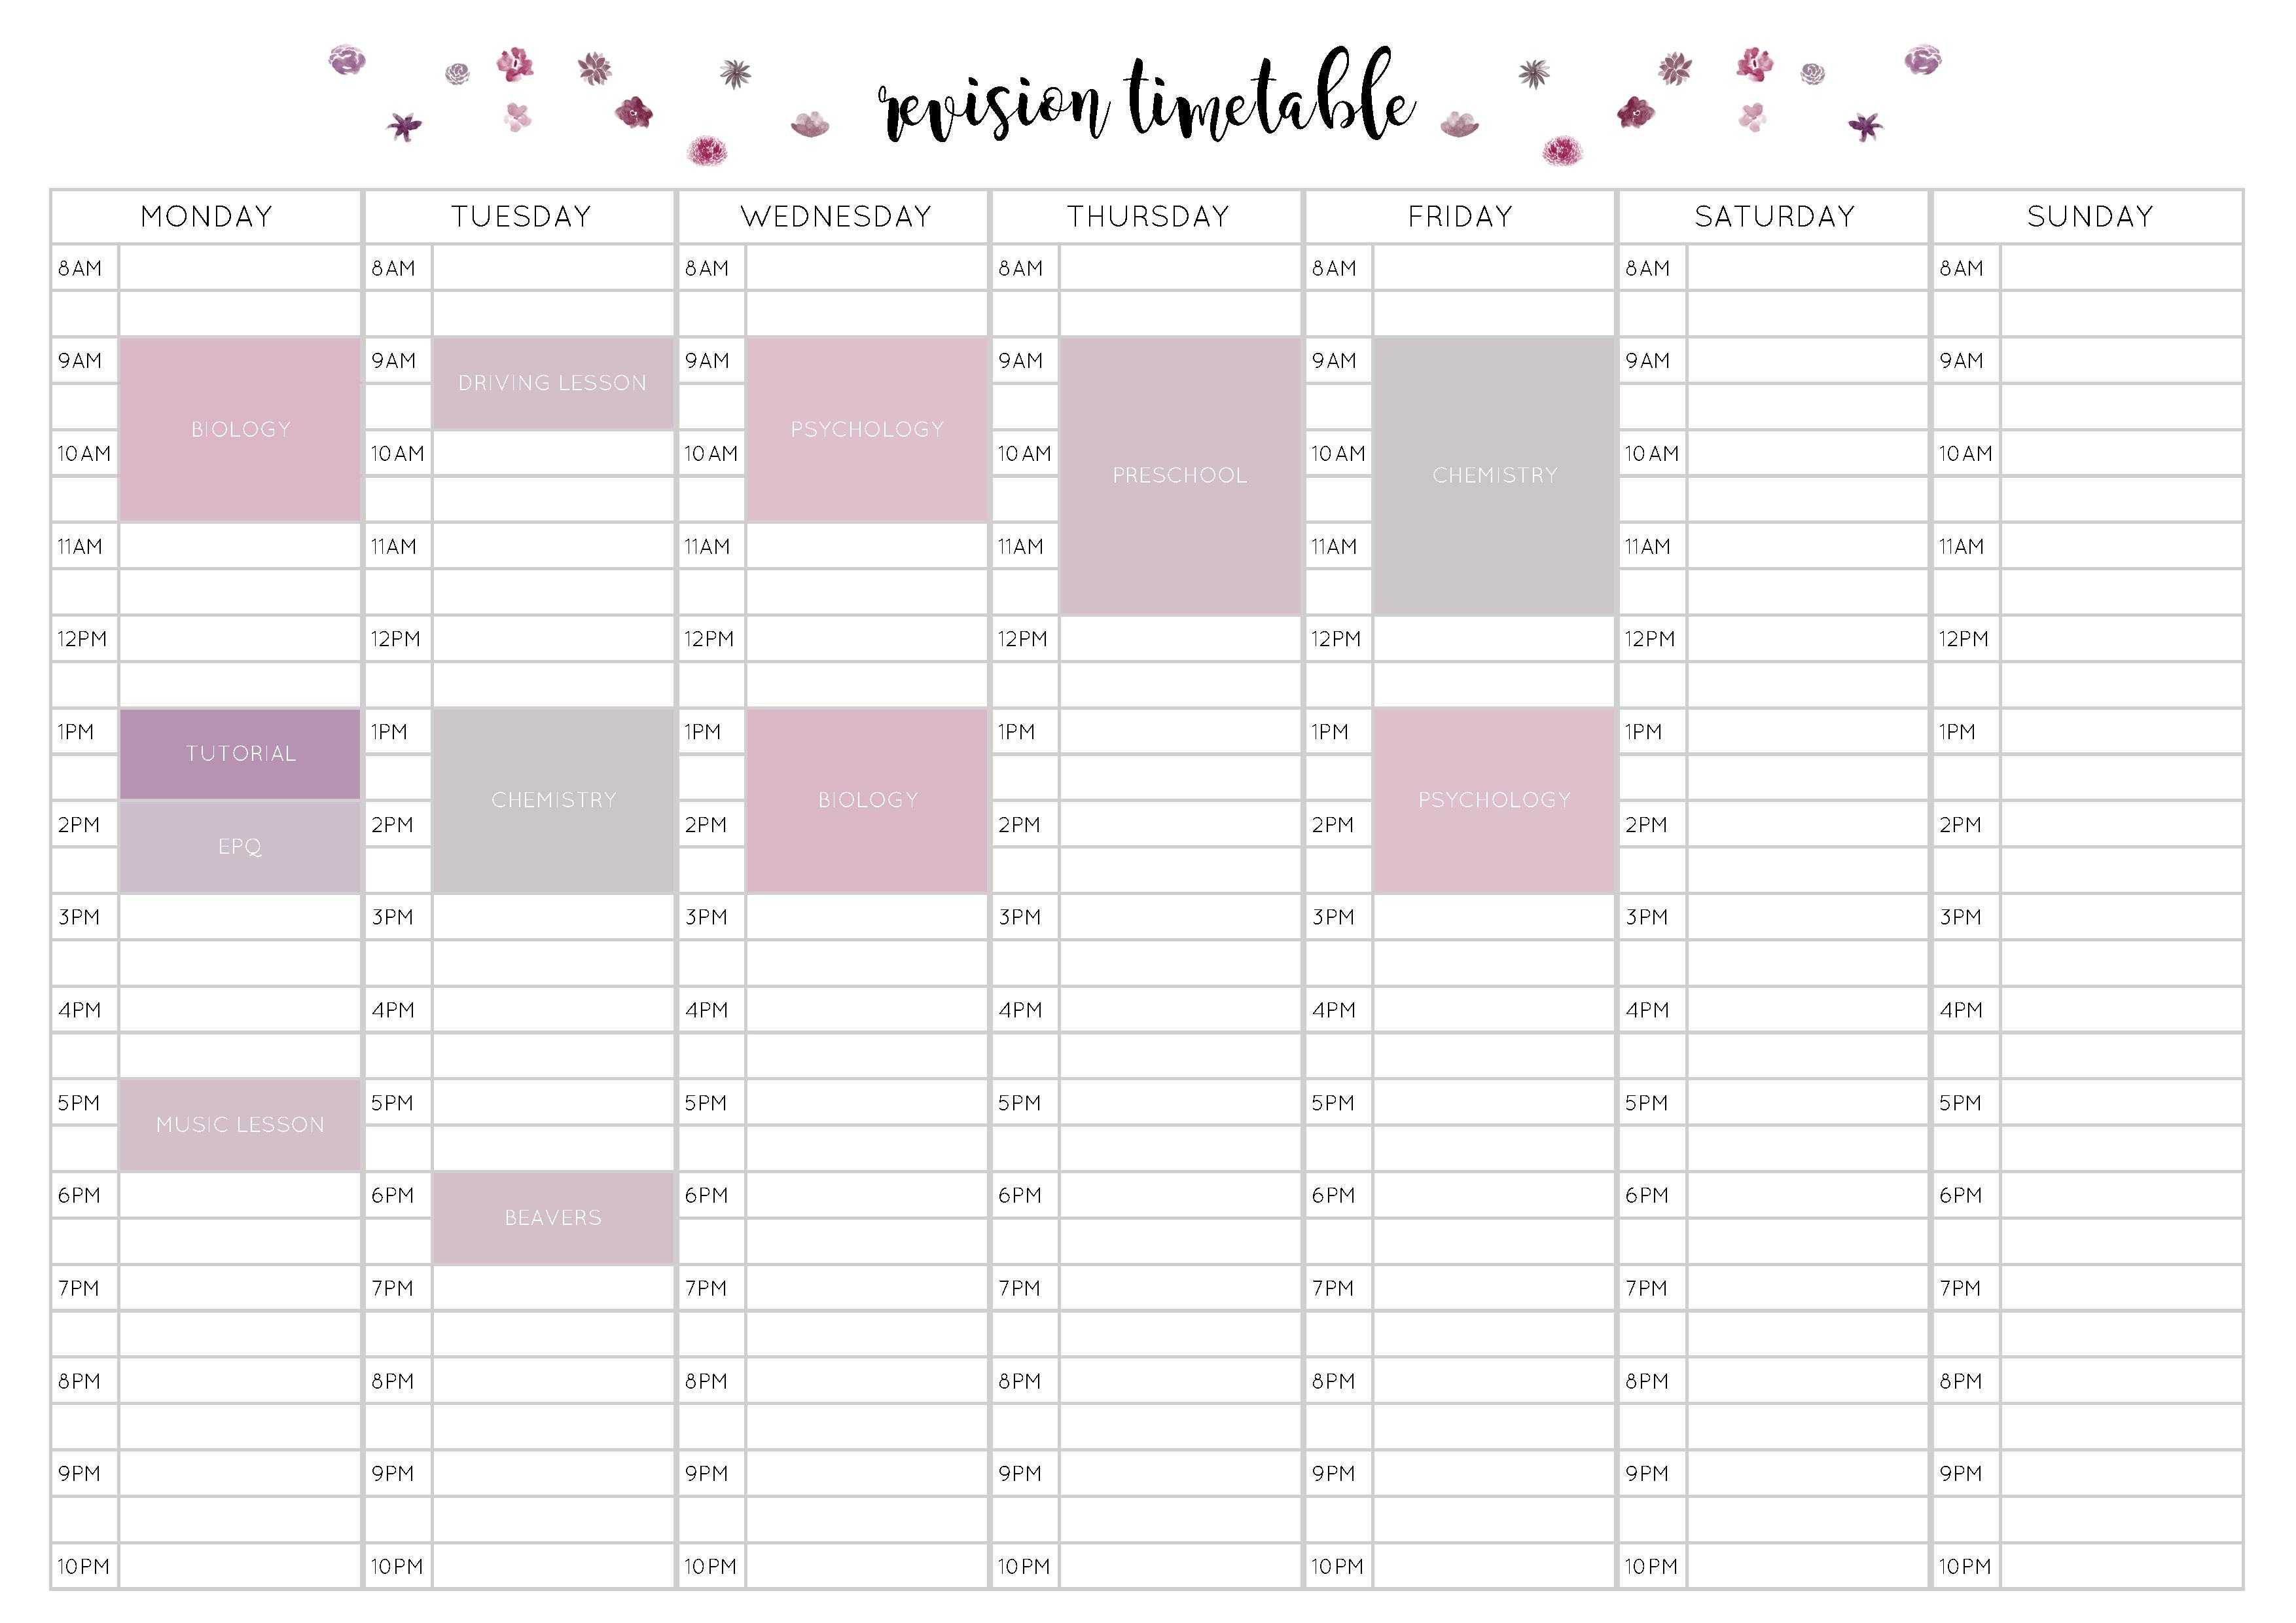 Free Revision Timetable Printable – Emily Studies With Regard To Blank Revision Timetable Template